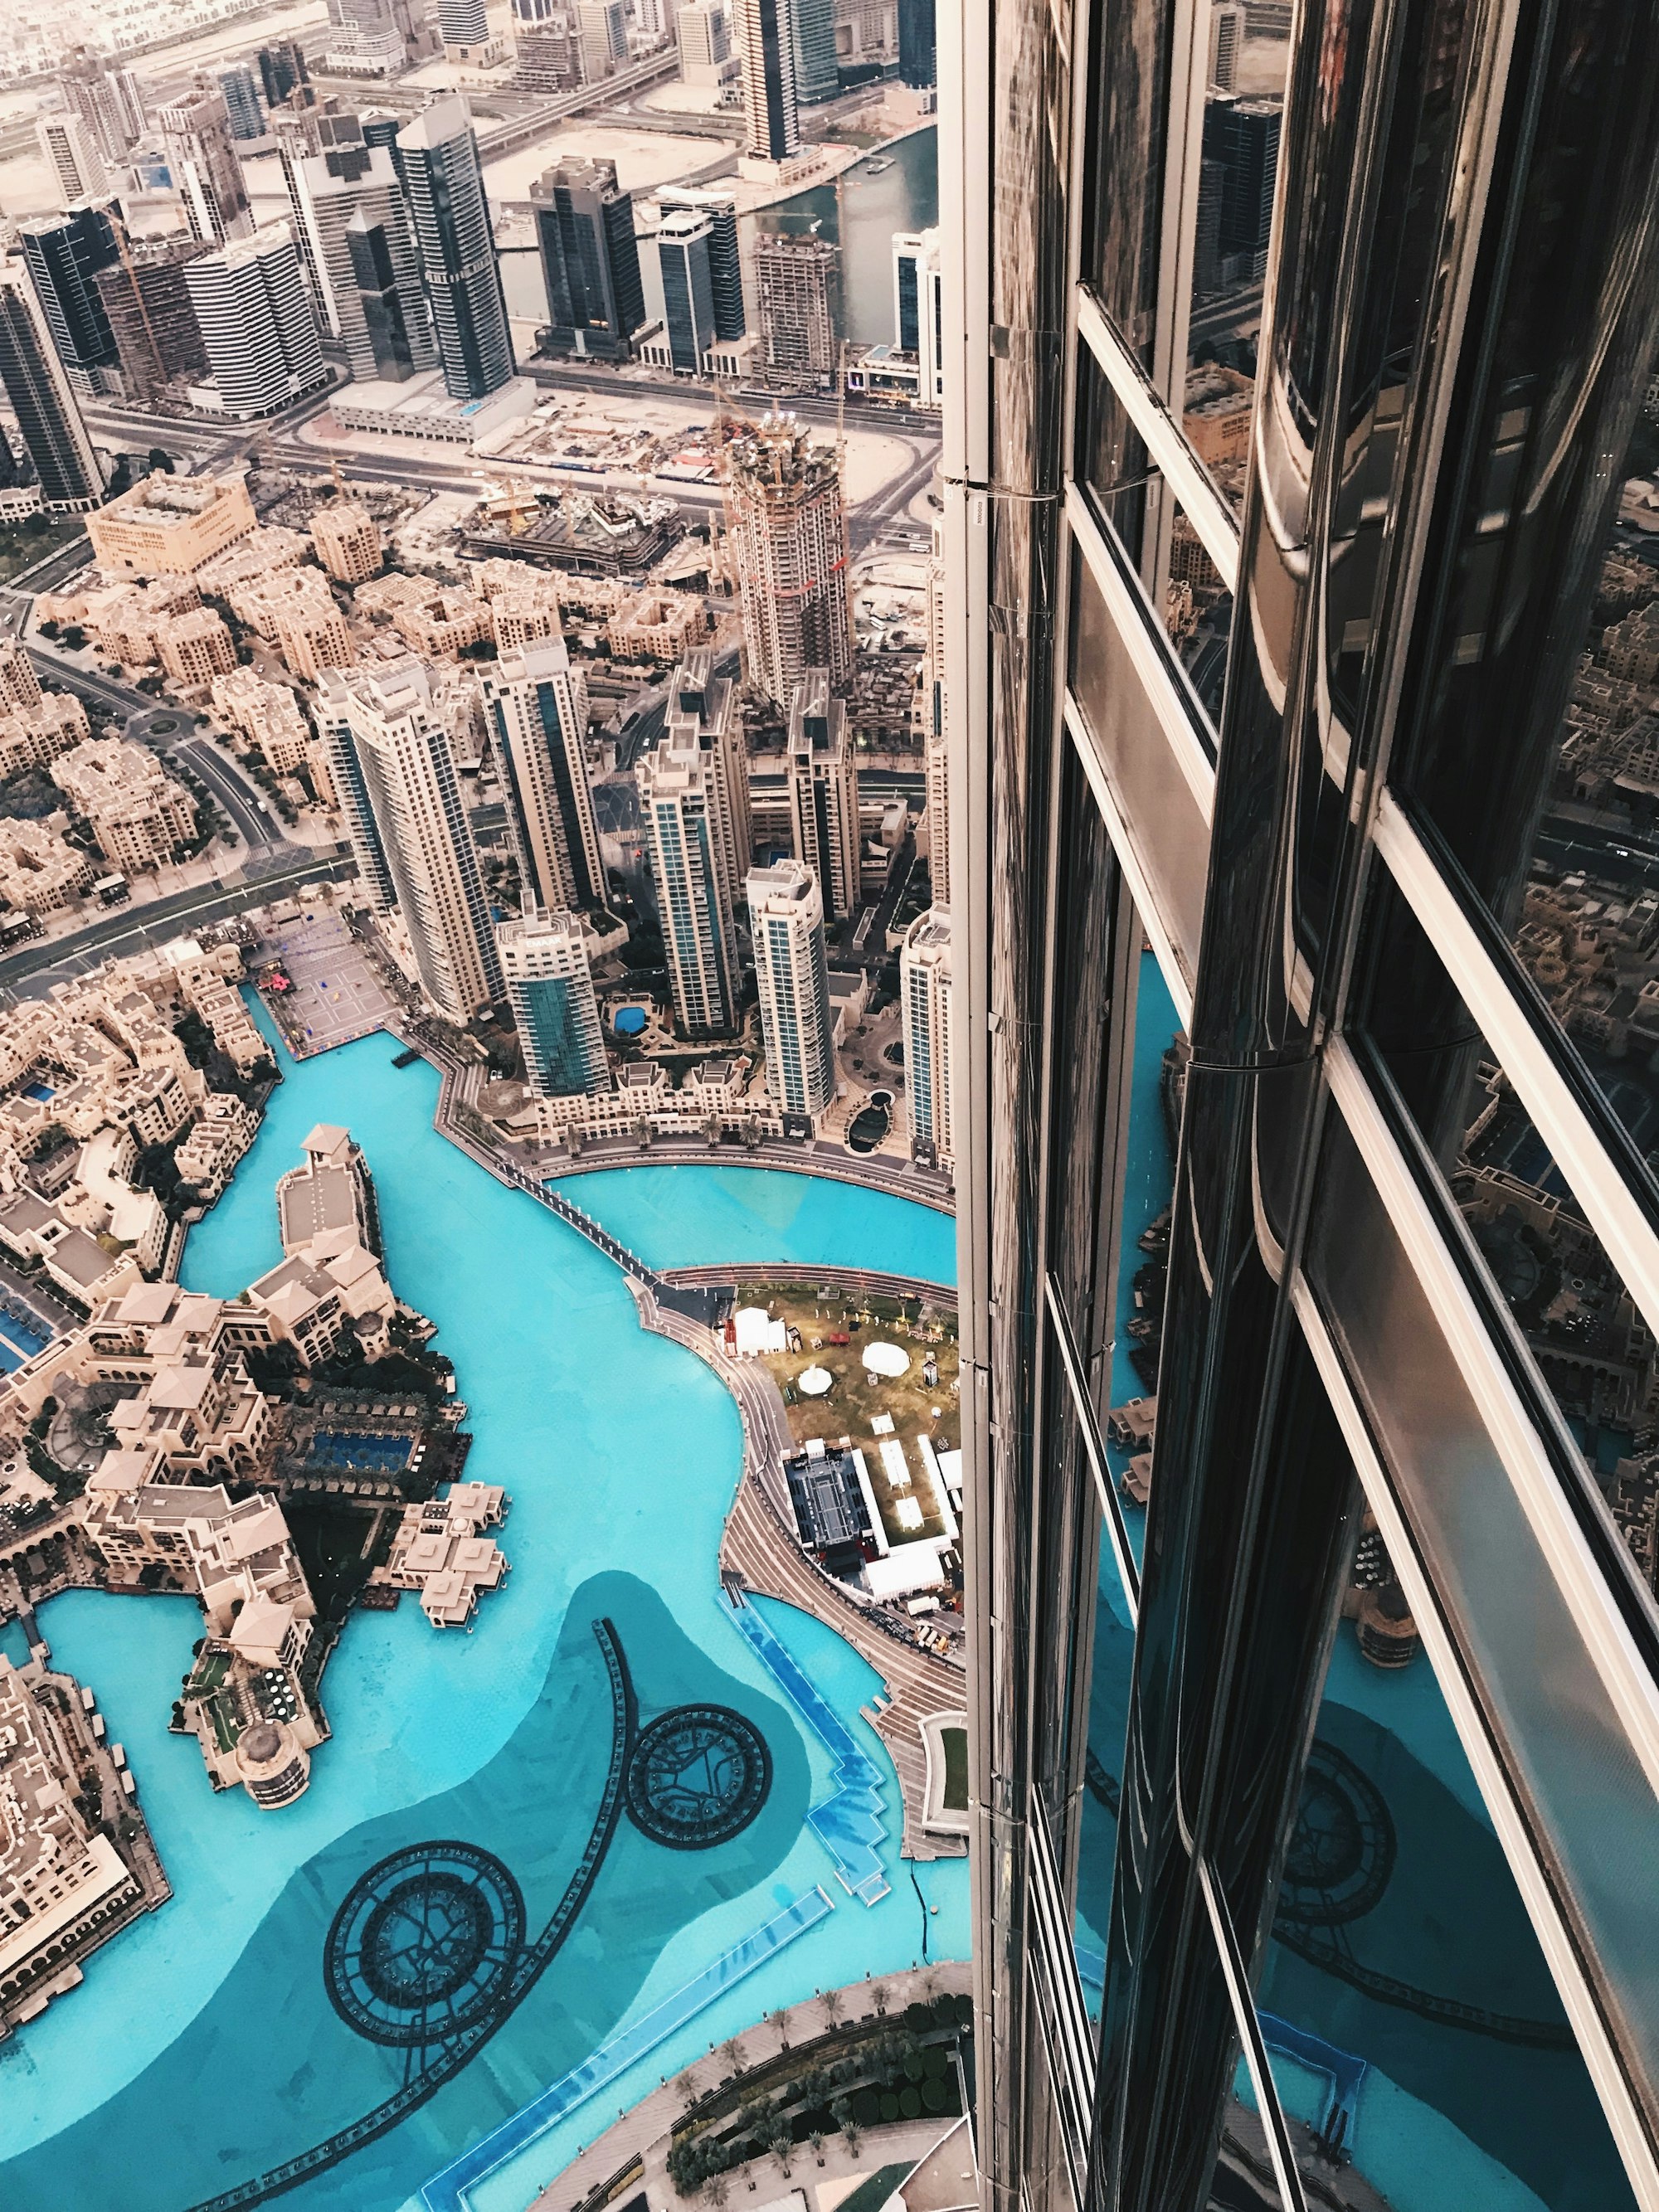 View from above over Dubai